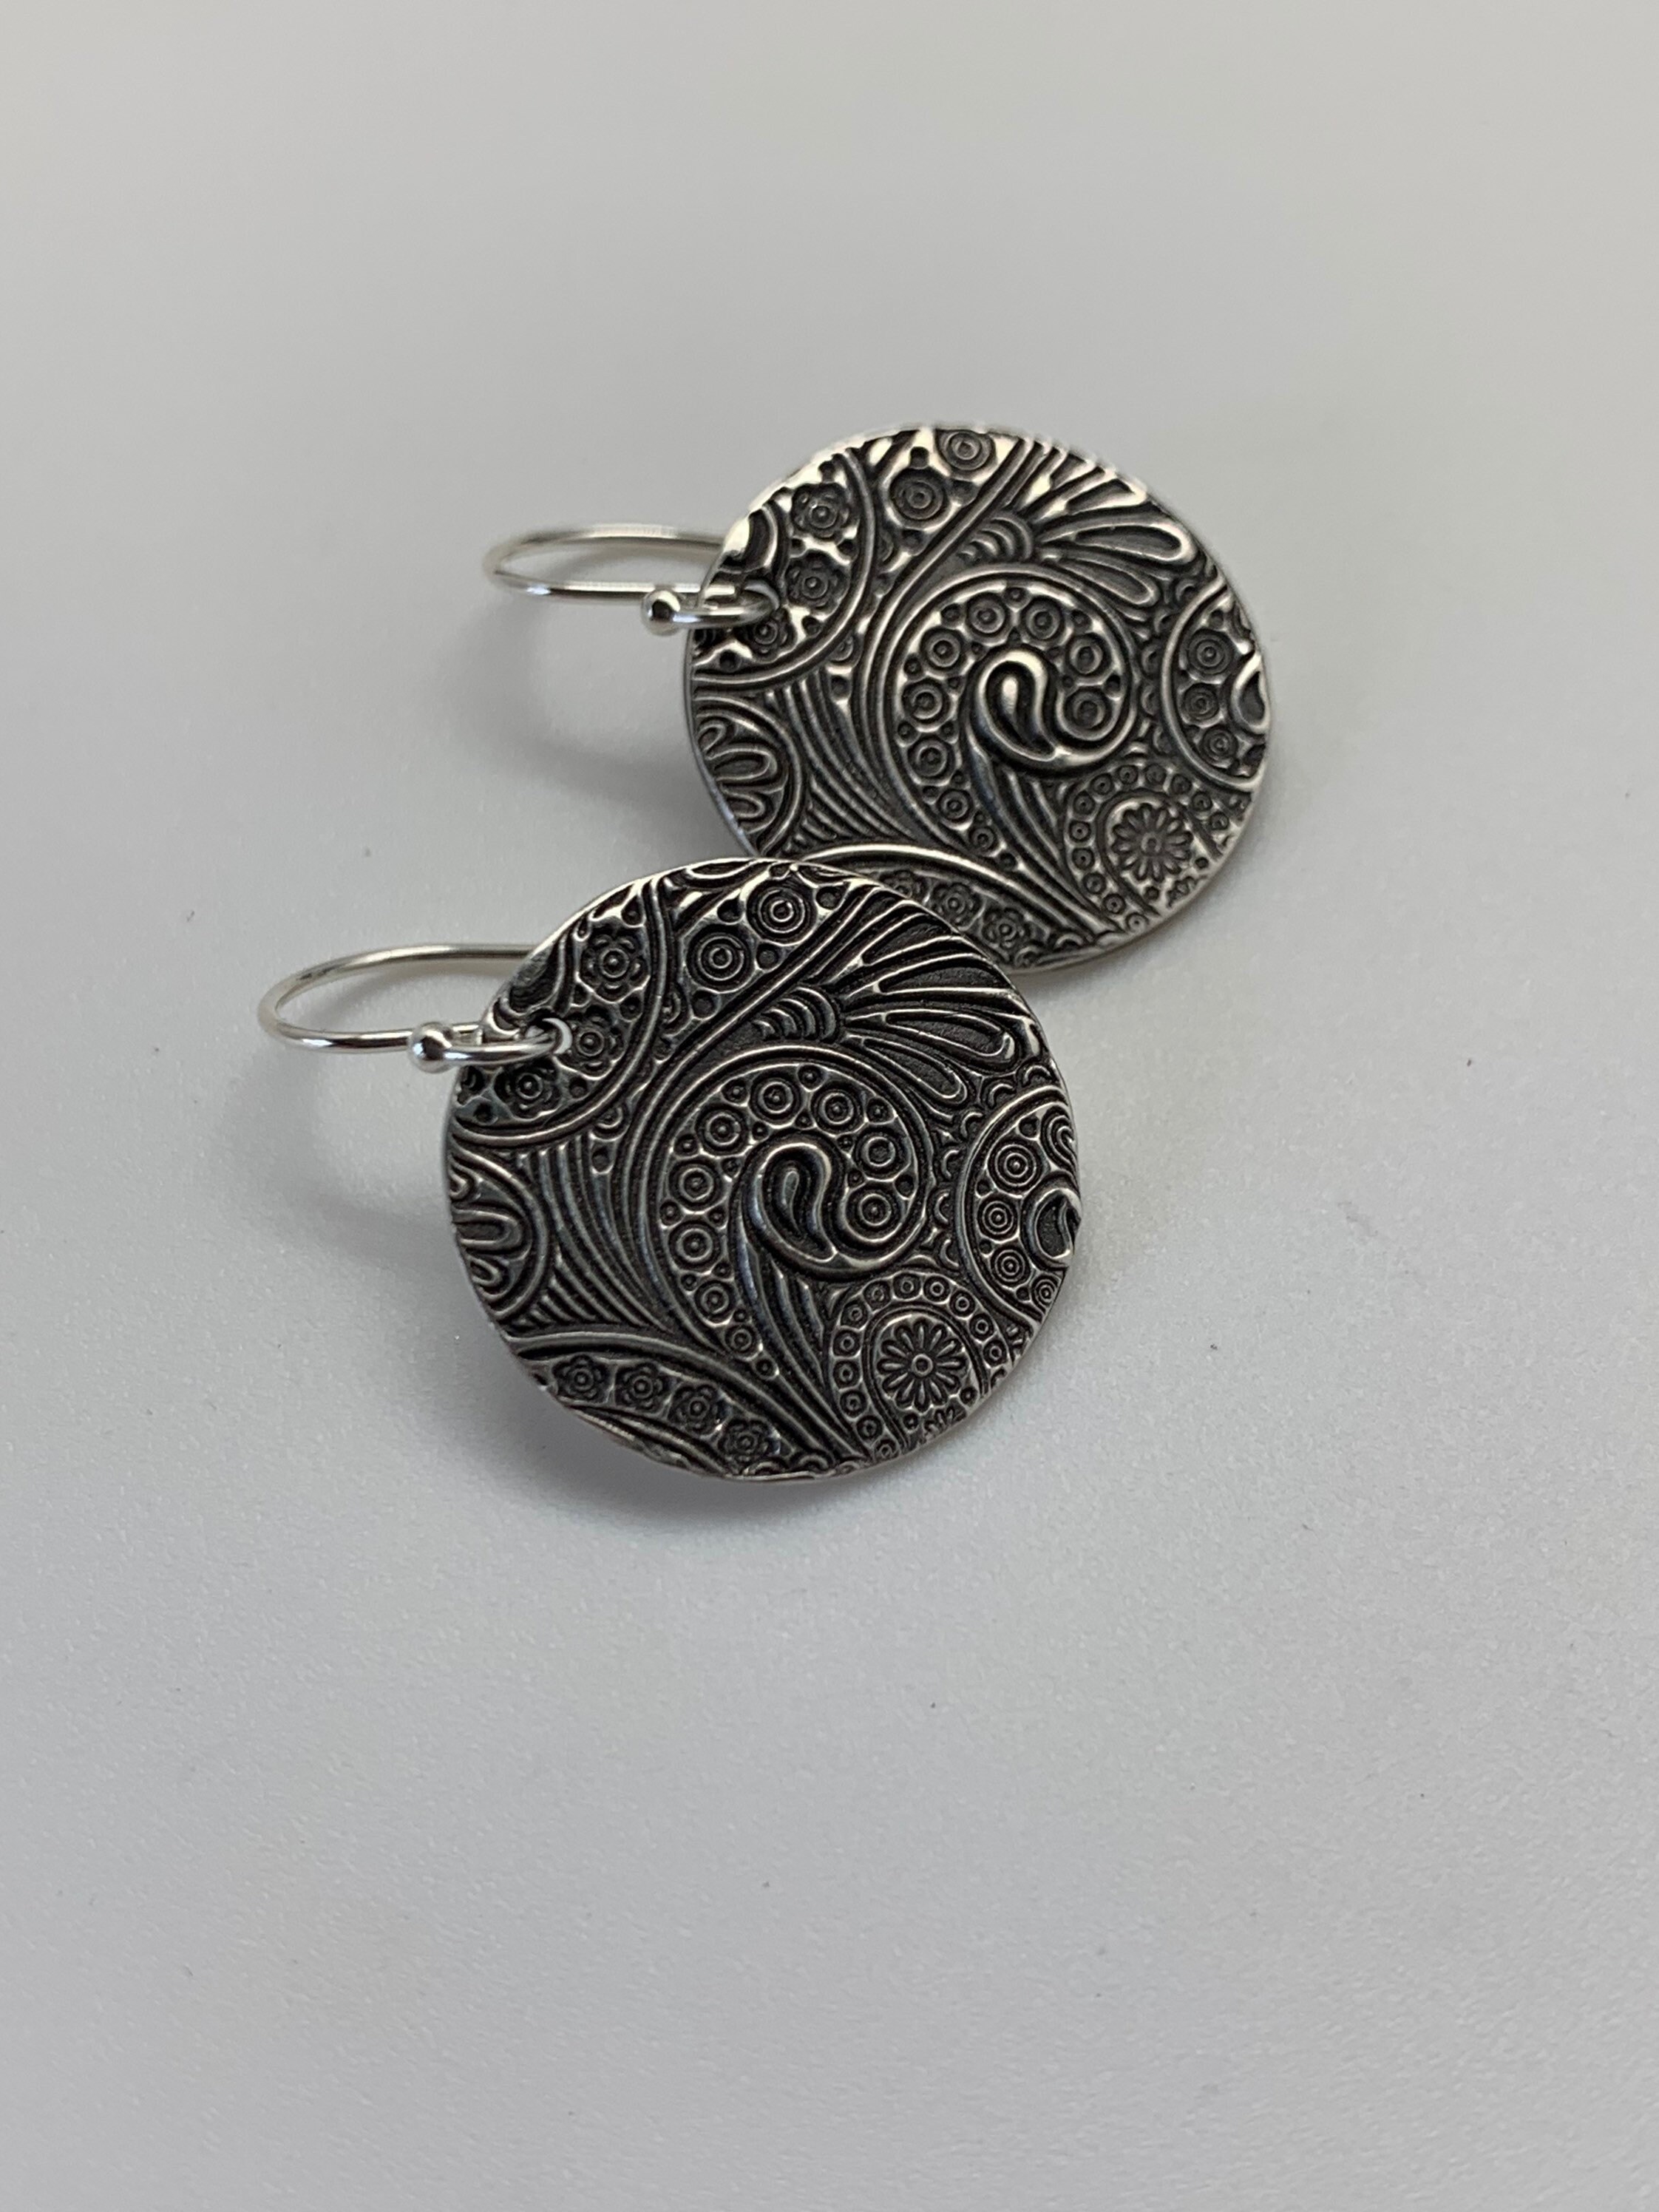 Silver Round Paisley Floral Earrings Sterling Silver Earrings | Etsy